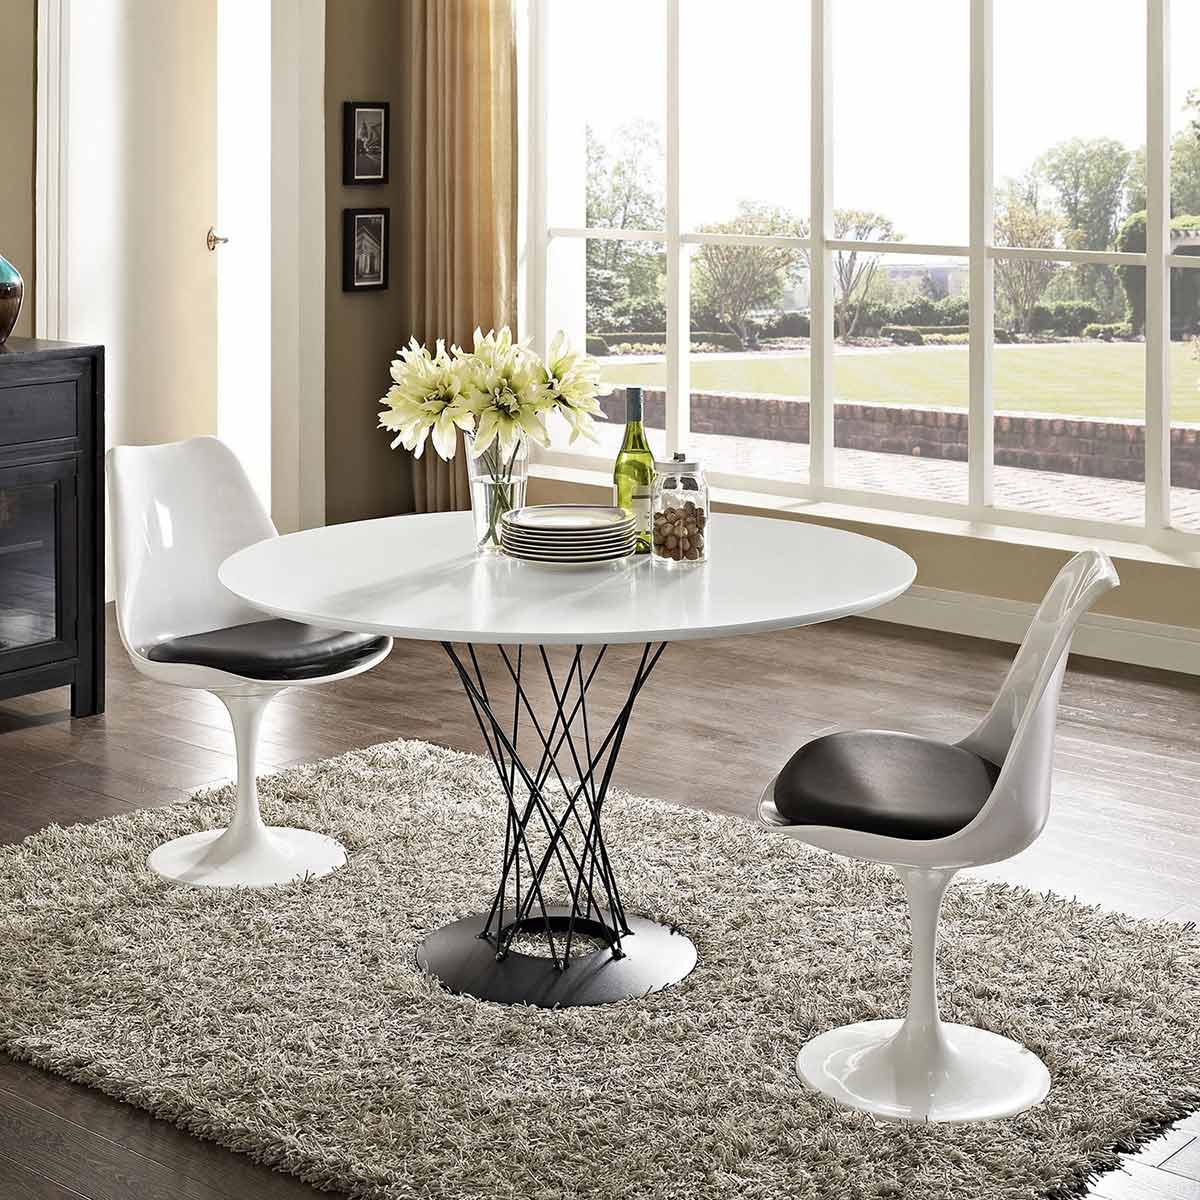 Modway Cyclone Stainless Steel Dining Table - White